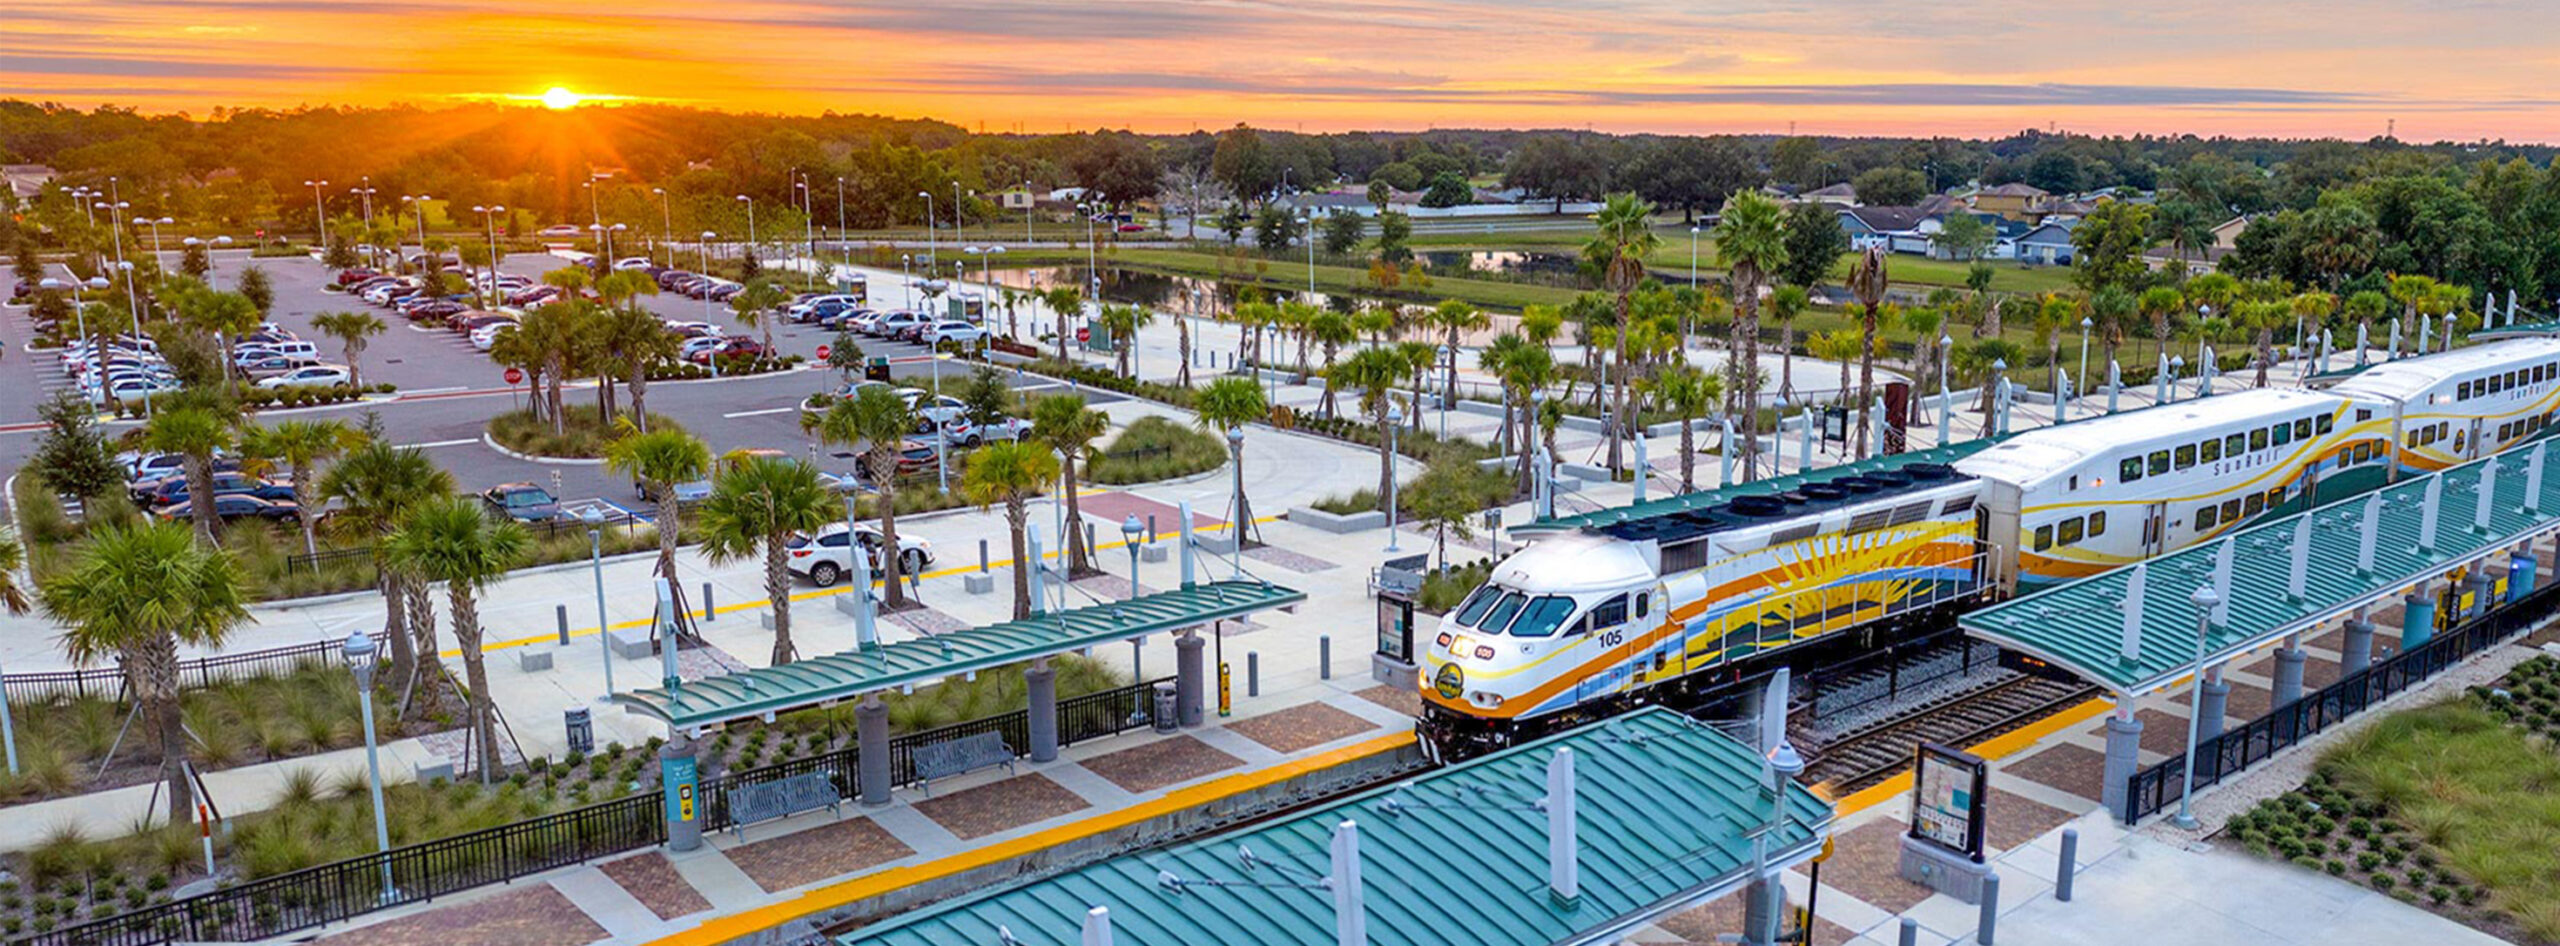 Masthead image - Aerial image of Meadow Woods Station and SunRail Train